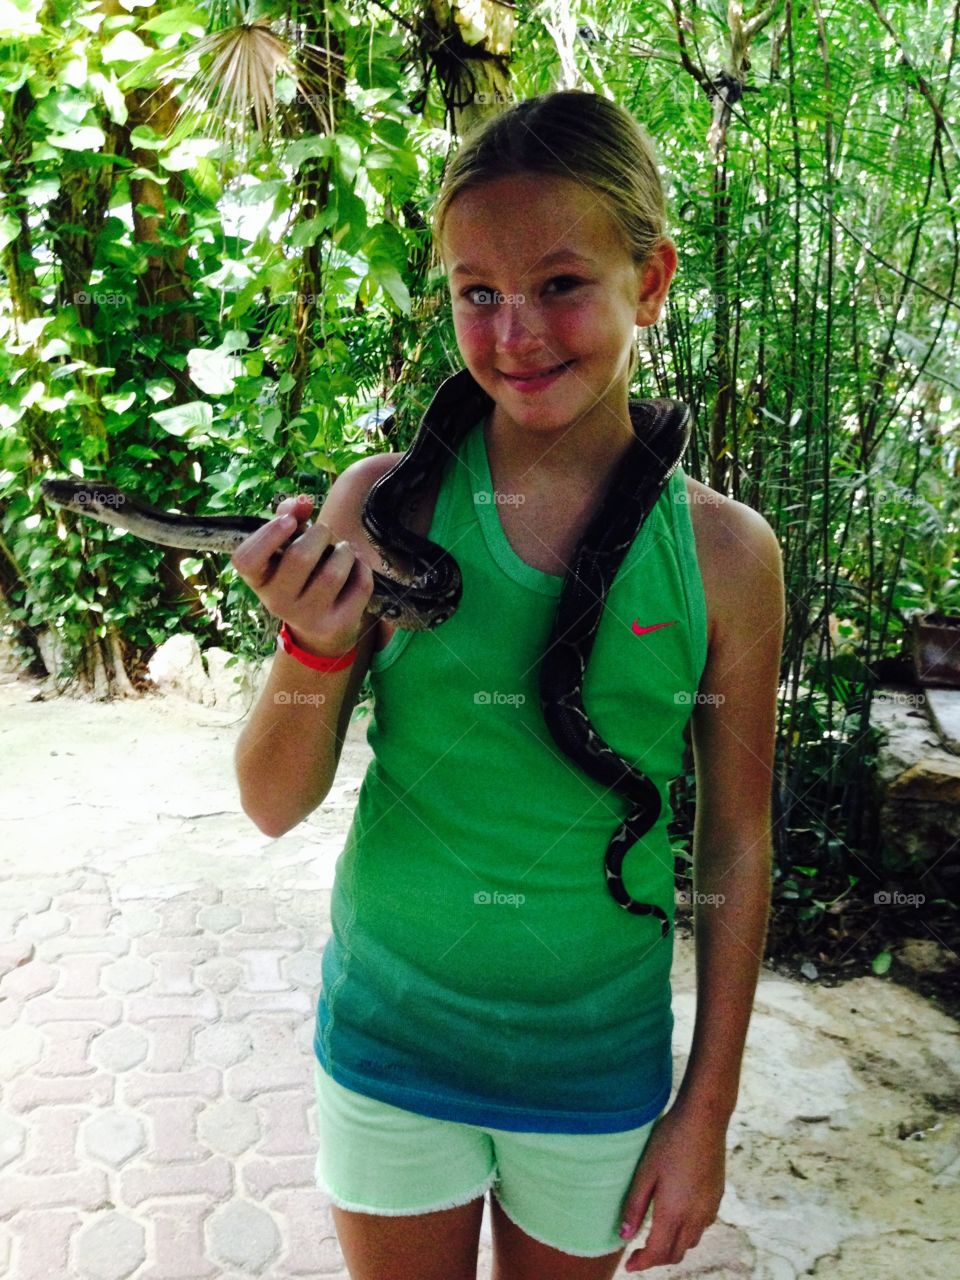 Snake. This was a photo of a girl holding a snake